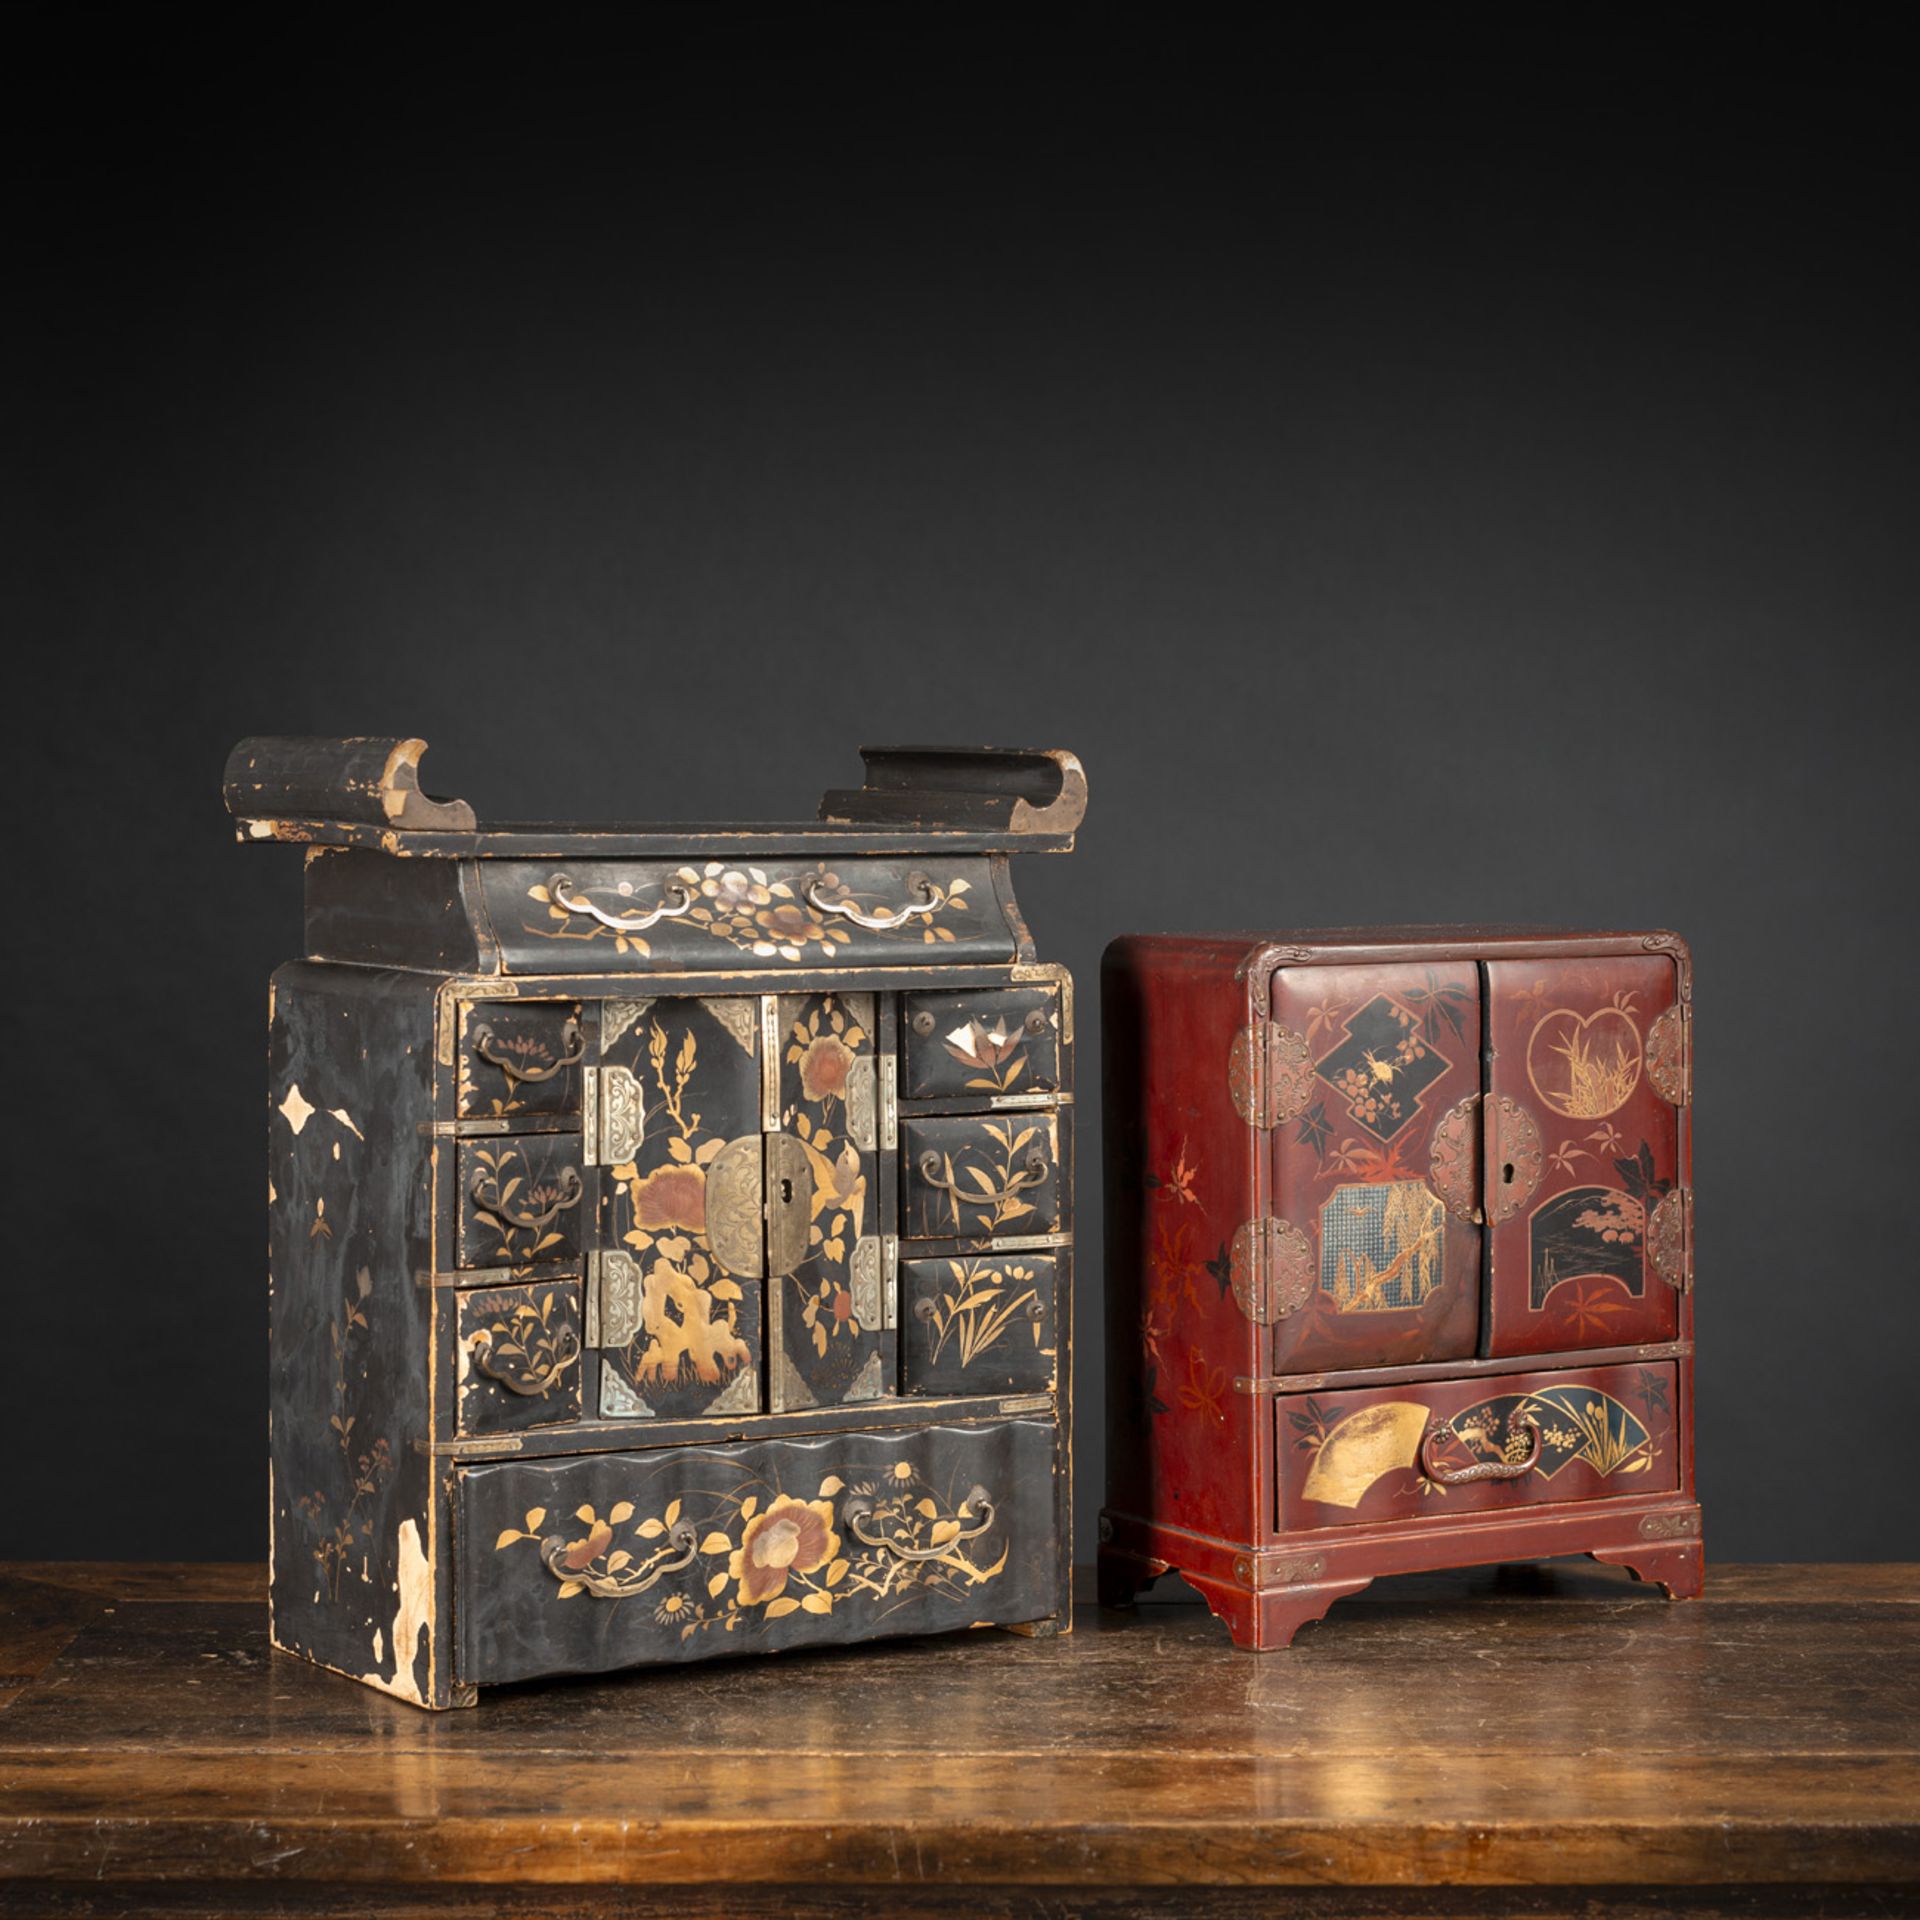 TWO SMALL BLACK AND RED LACQUERED CABINETS WITH DRAWERS AND FLORAL DECORATION, PARTLY PAINTED GOLD